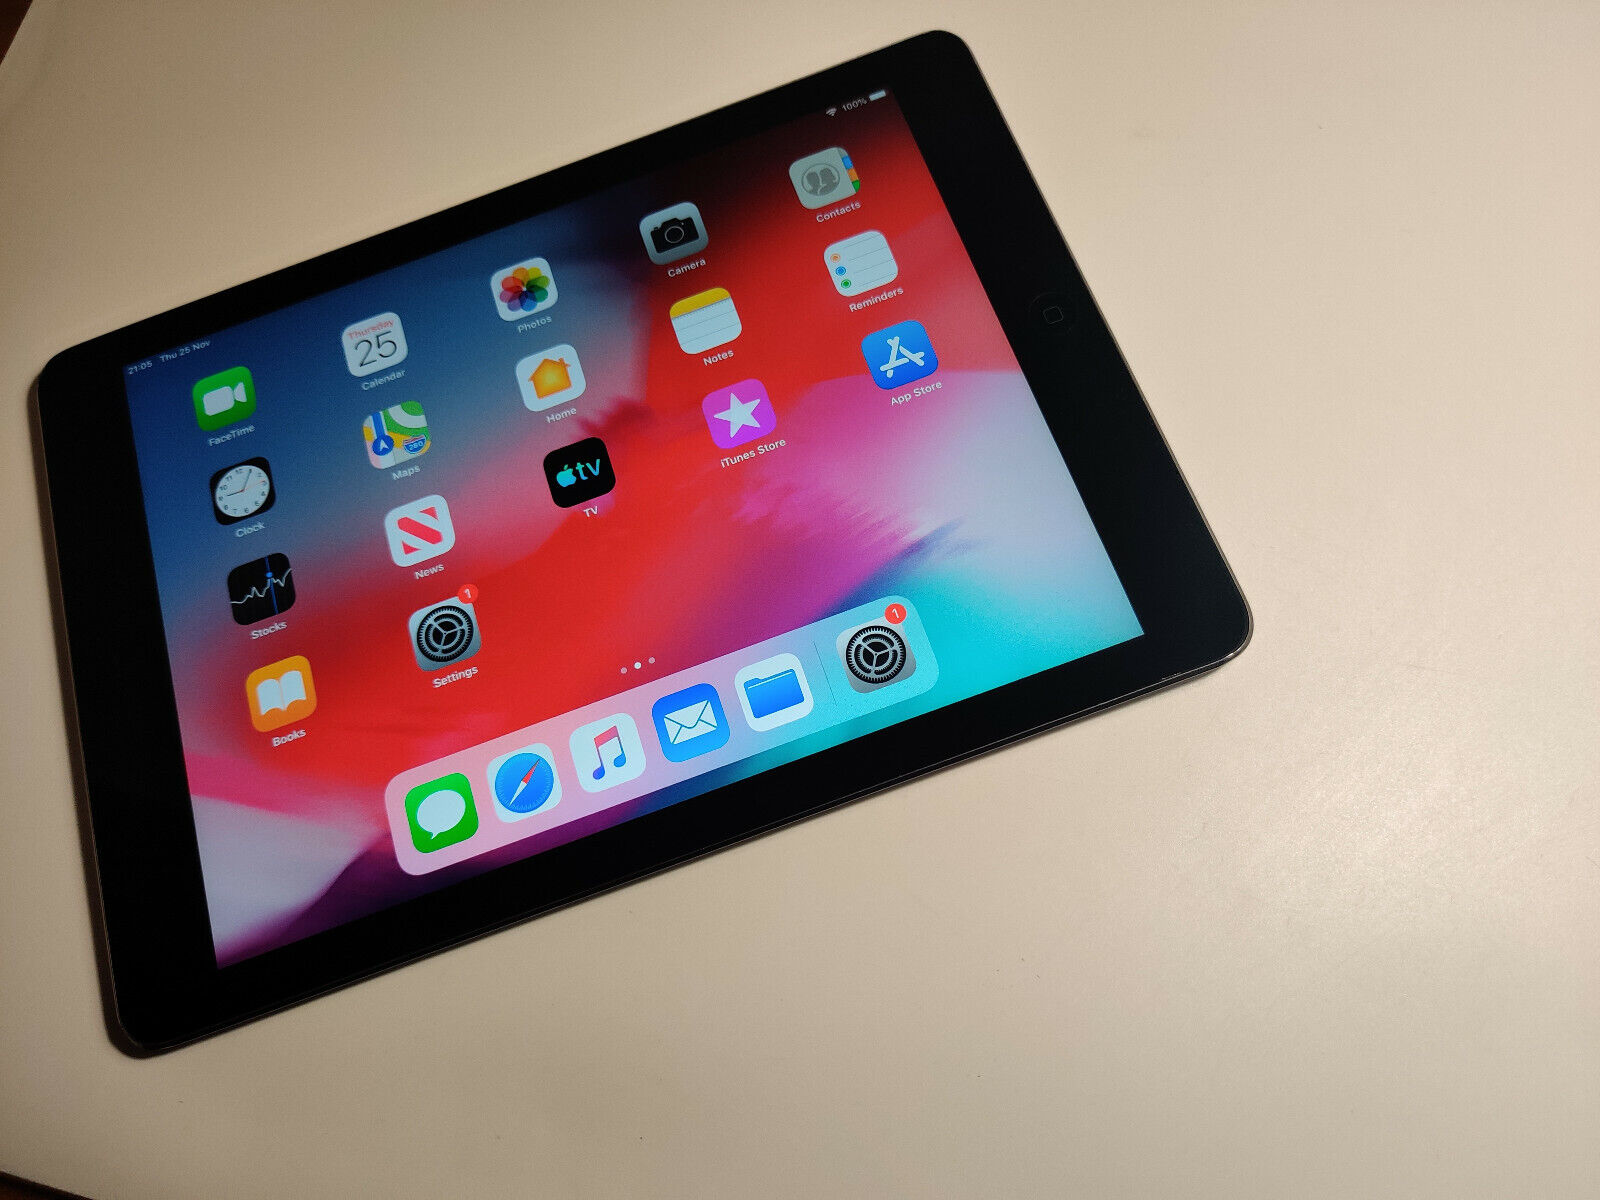 Apple iPad Air 1st Gen. 16GB Wi-Fi 9.7in - Space Grey for sale 